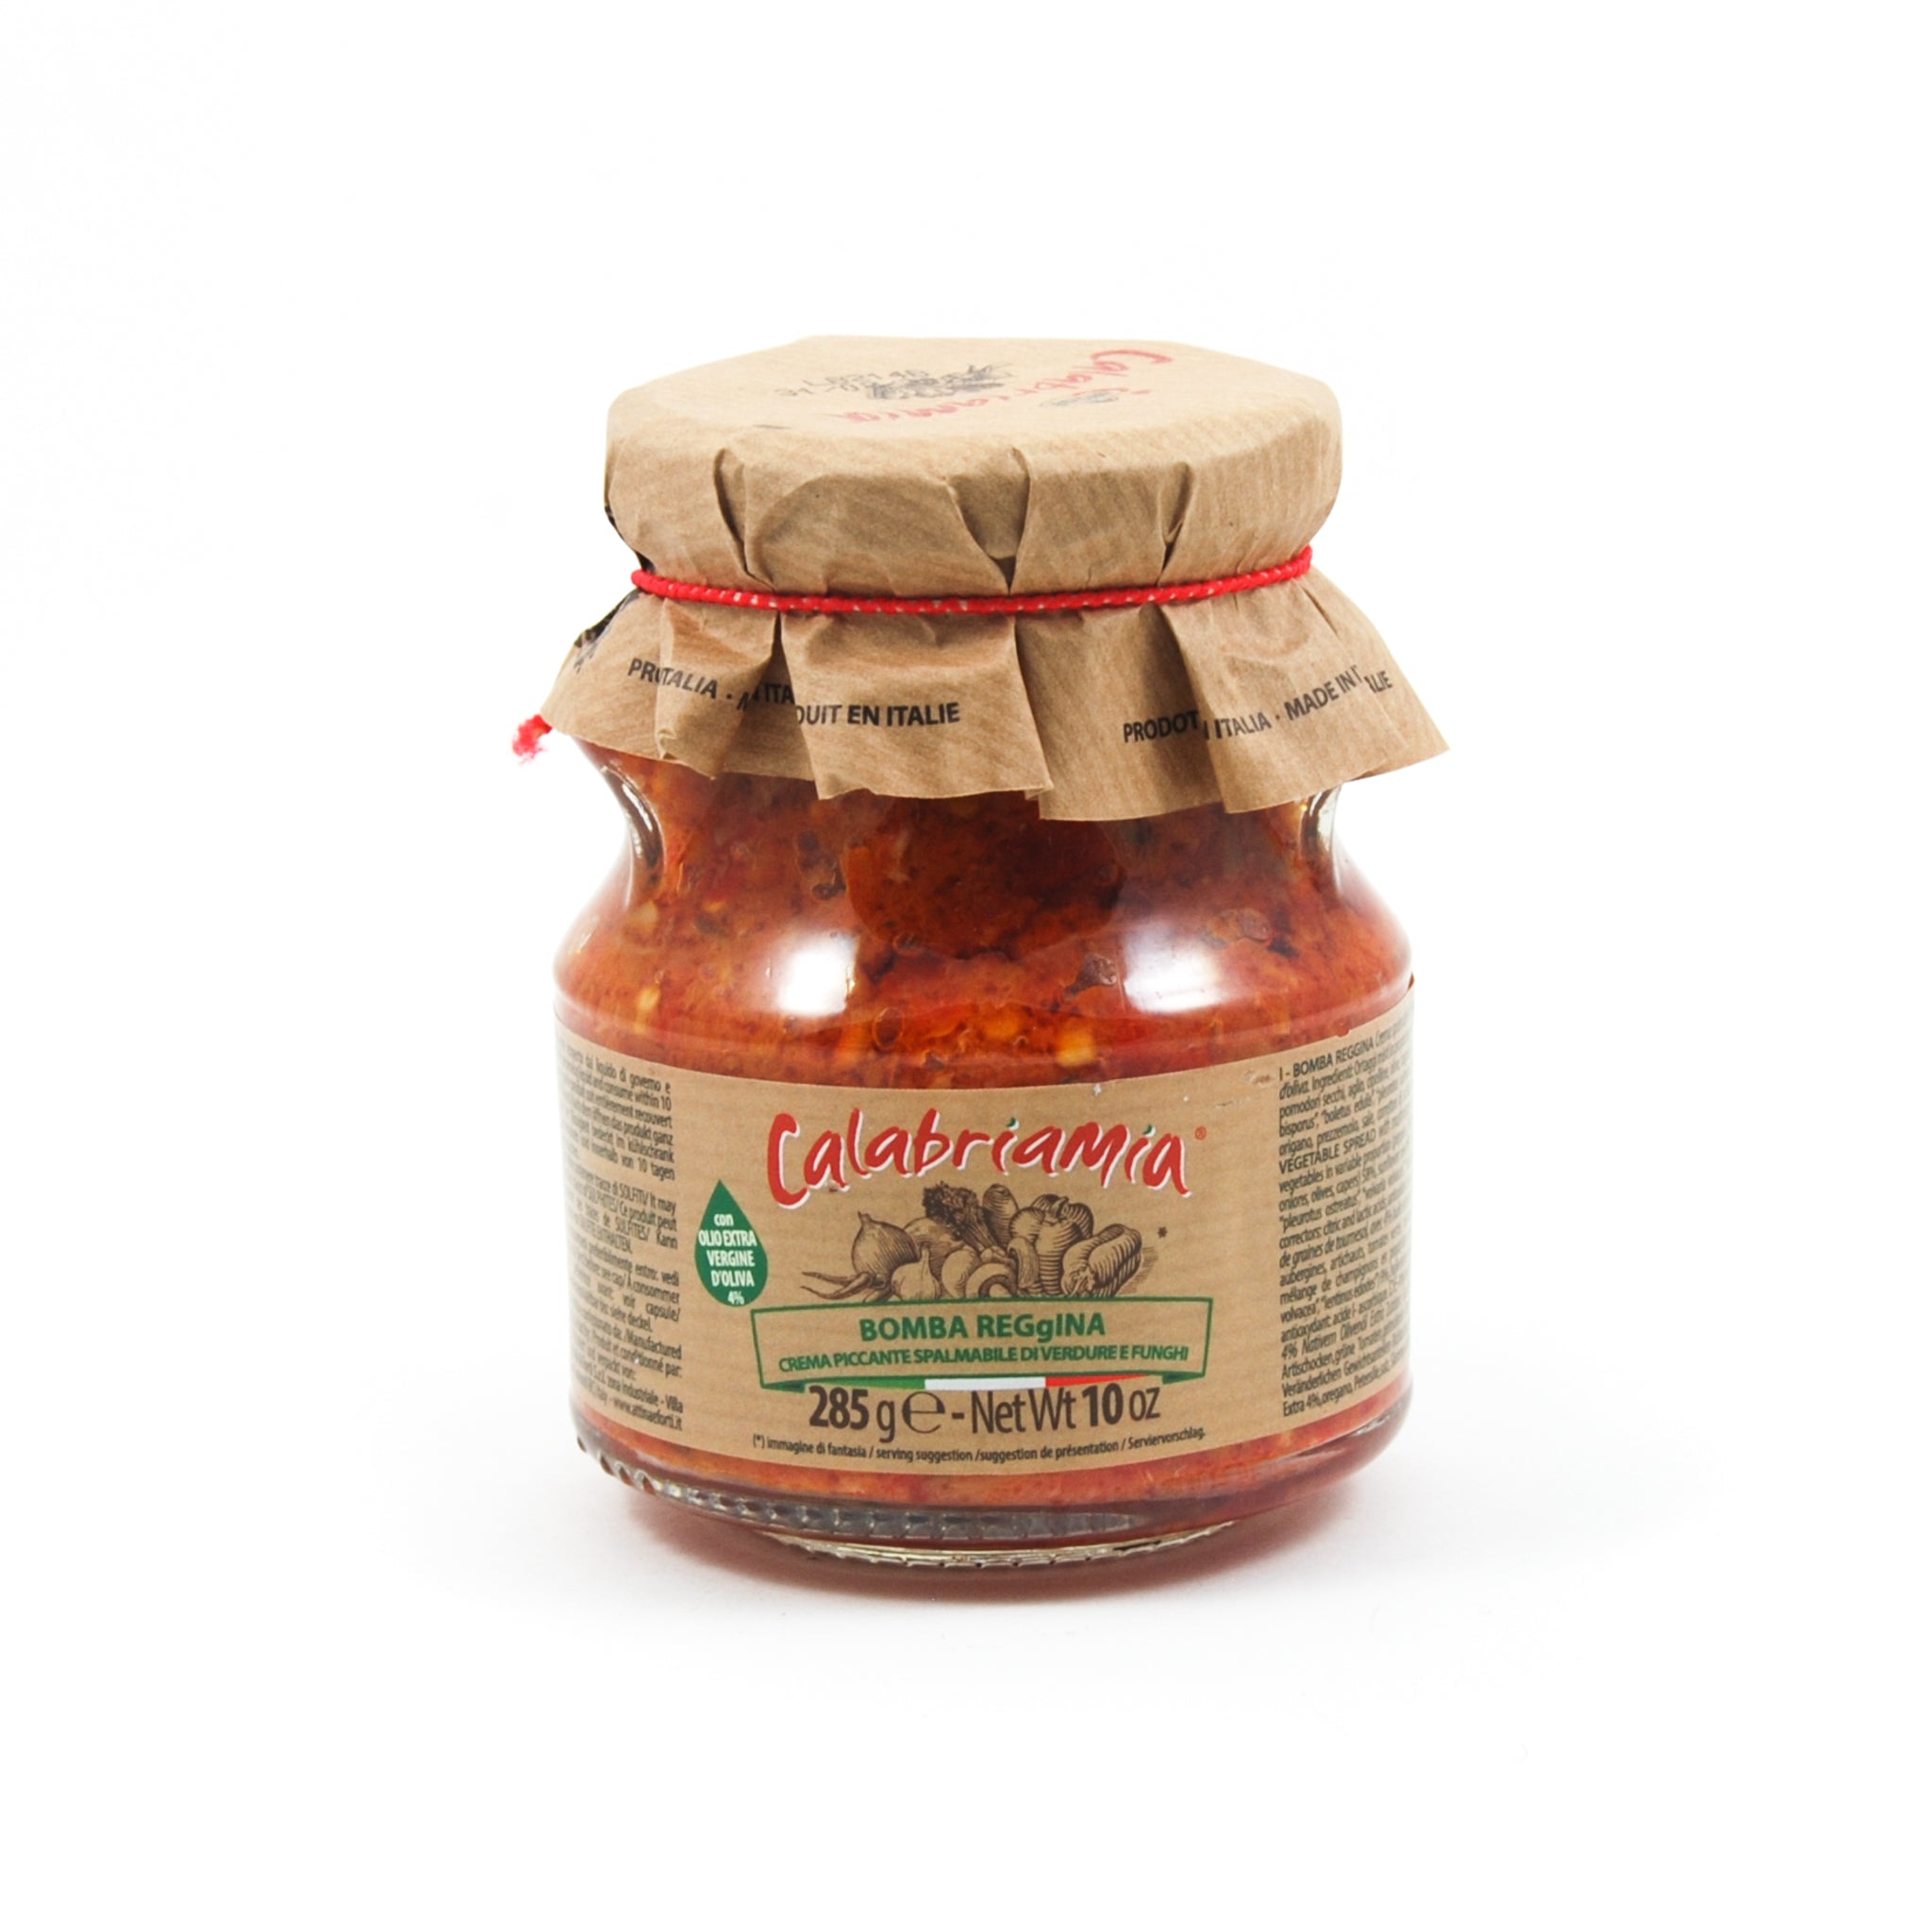 Calabriamia Bomba Calabrese Spicy Calabrian Vegetable Spread 314g Ingredients Jam Honey & Preserves Italian Food